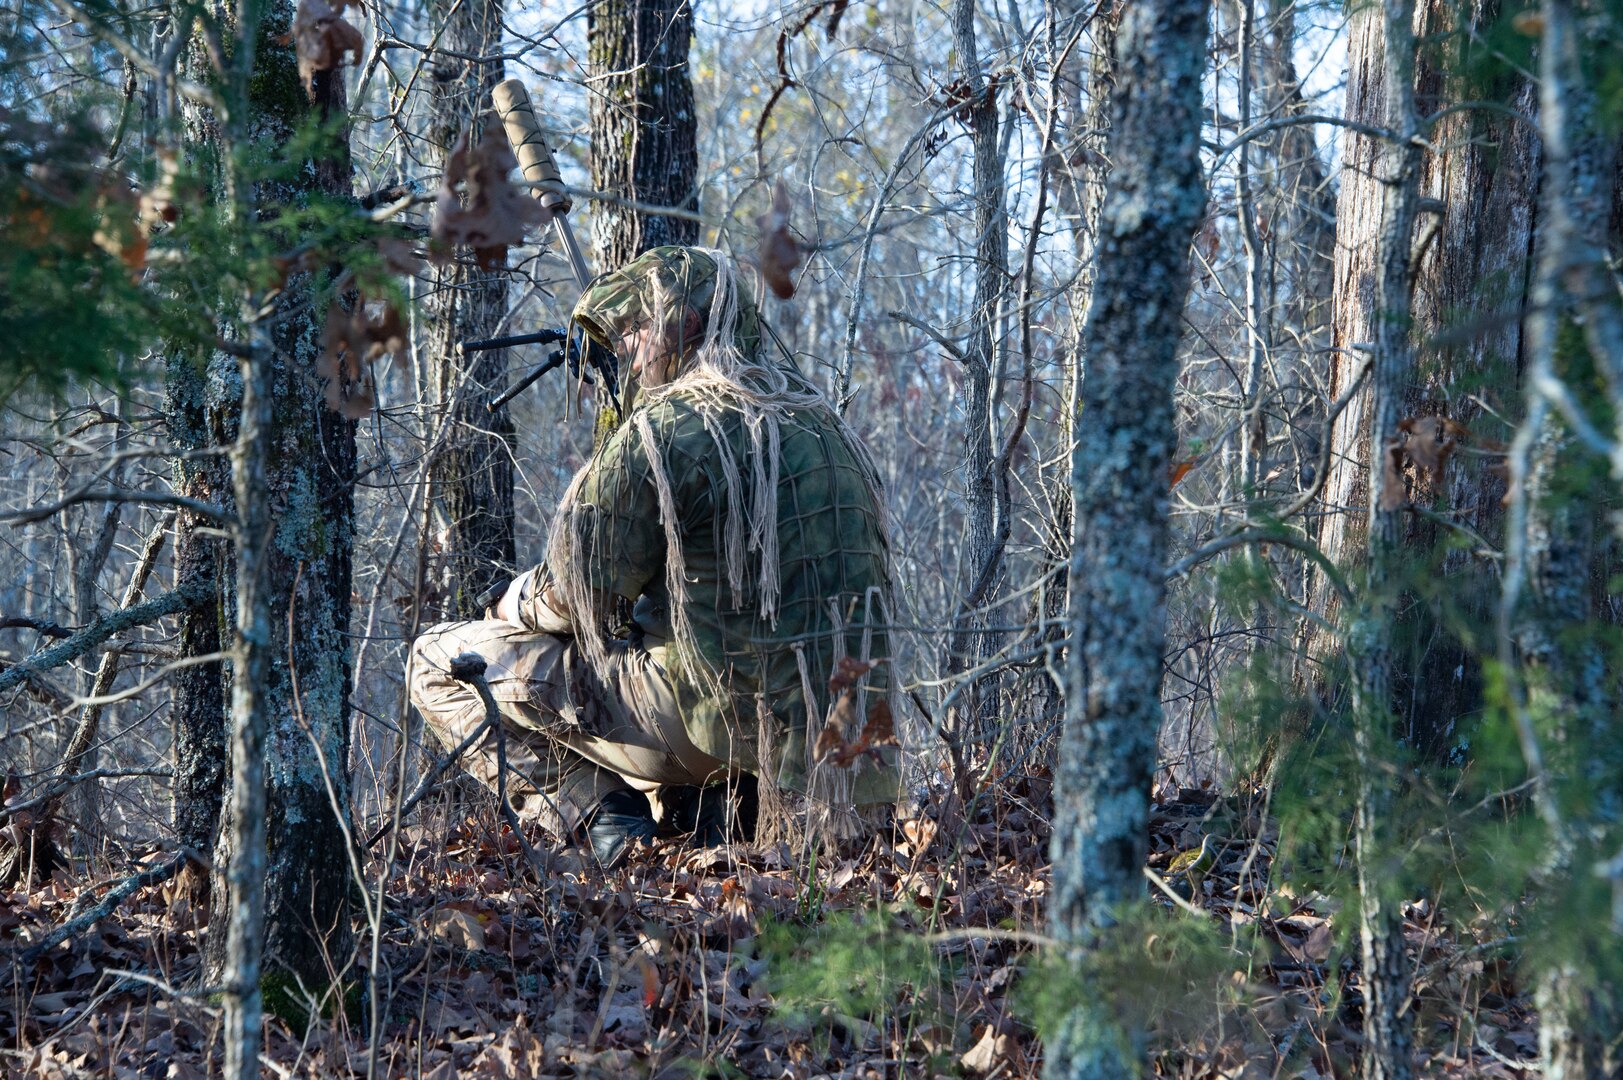 A sniper competitor surveys the area before moving in closer during the stalk portion of the 51st Winston P. Wilson and 31st Armed Forces Skill at Arms Meeting Sniper Championships at the Fort Chaffee Joint Maneuver Training Center Dec. 7, 2021.